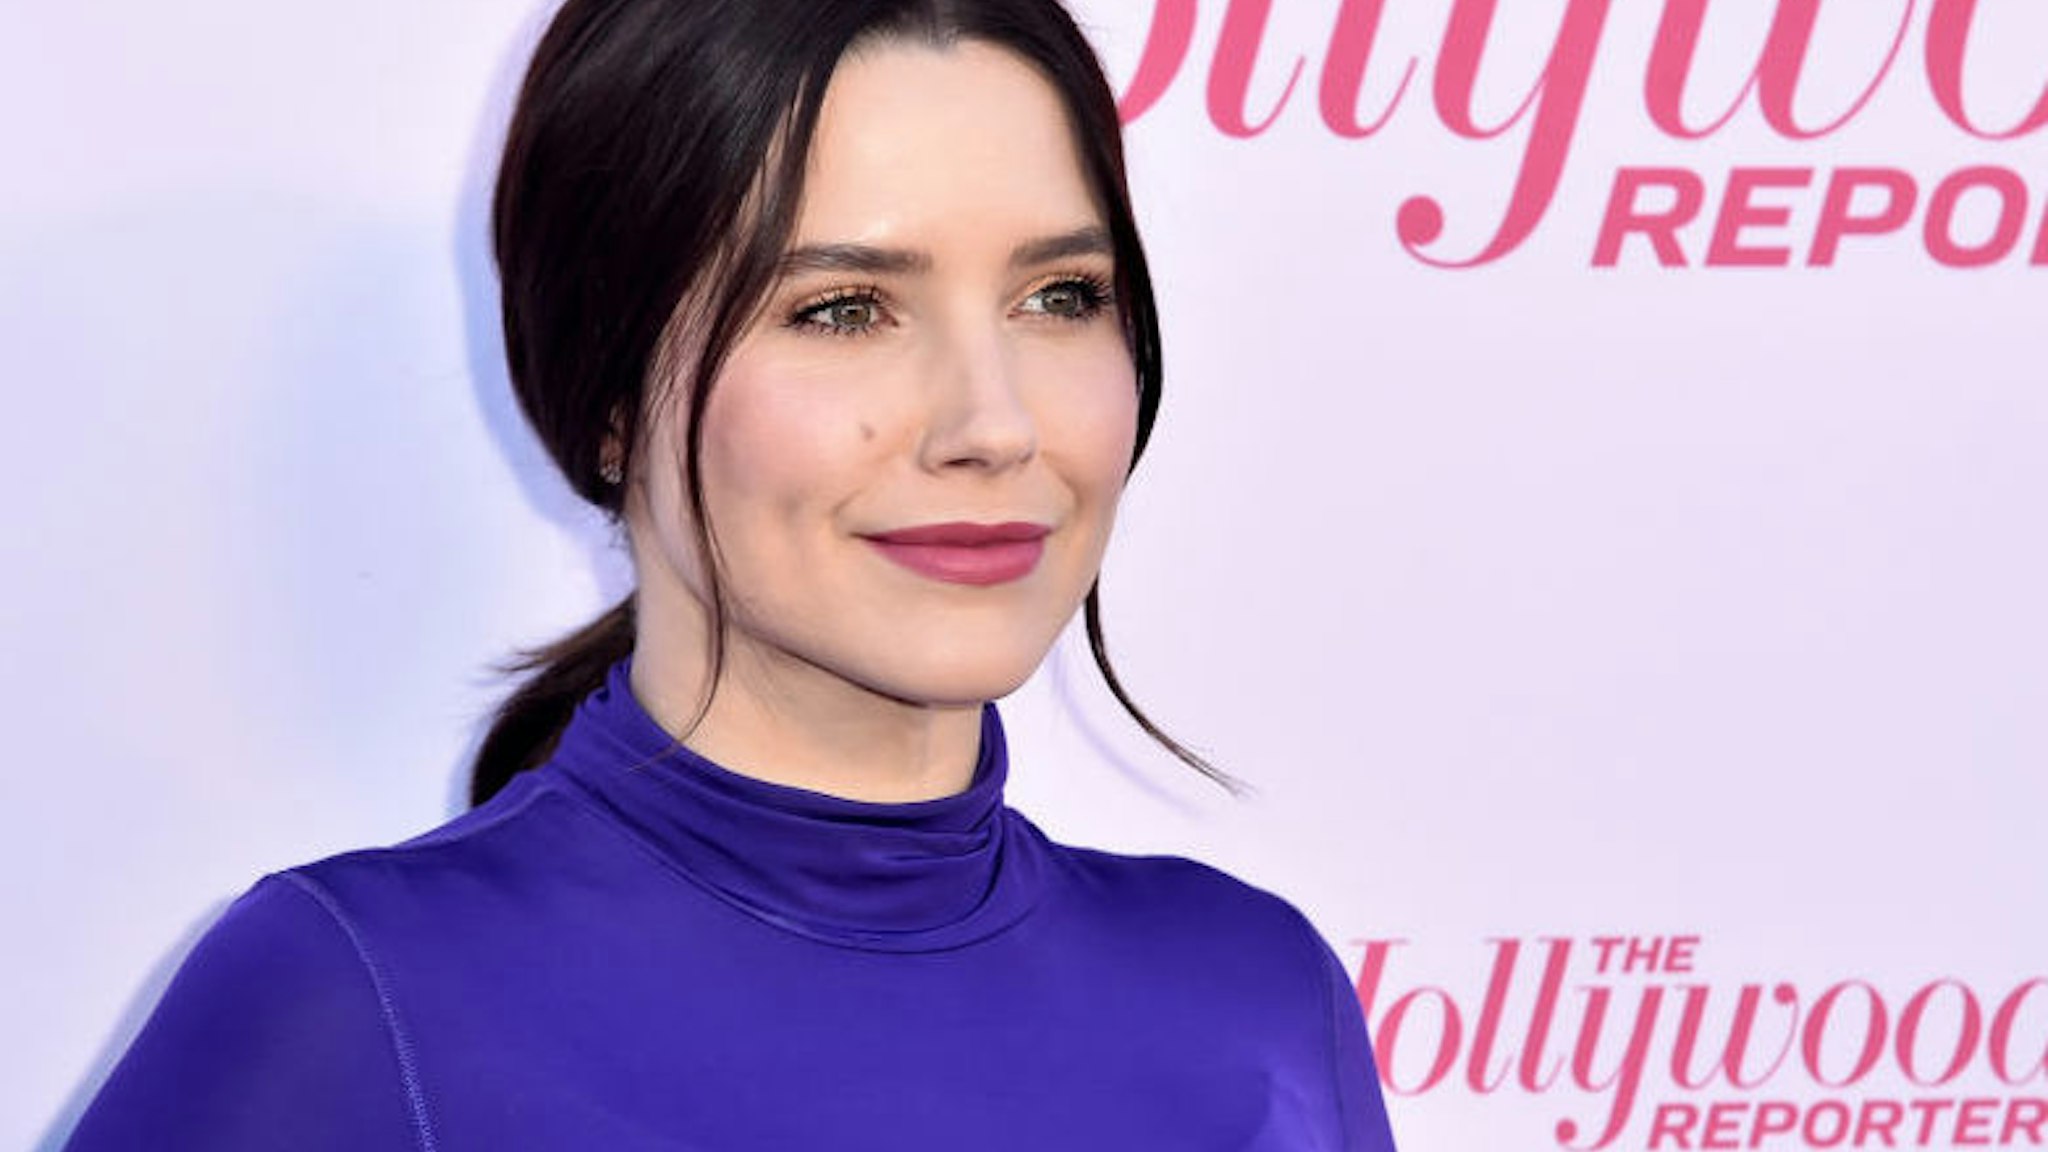 Actor Sophia Bush attends The Hollywood Reporter's Power 100 Women in Entertainment at Milk Studios on December 11, 2019 in Hollywood, California.